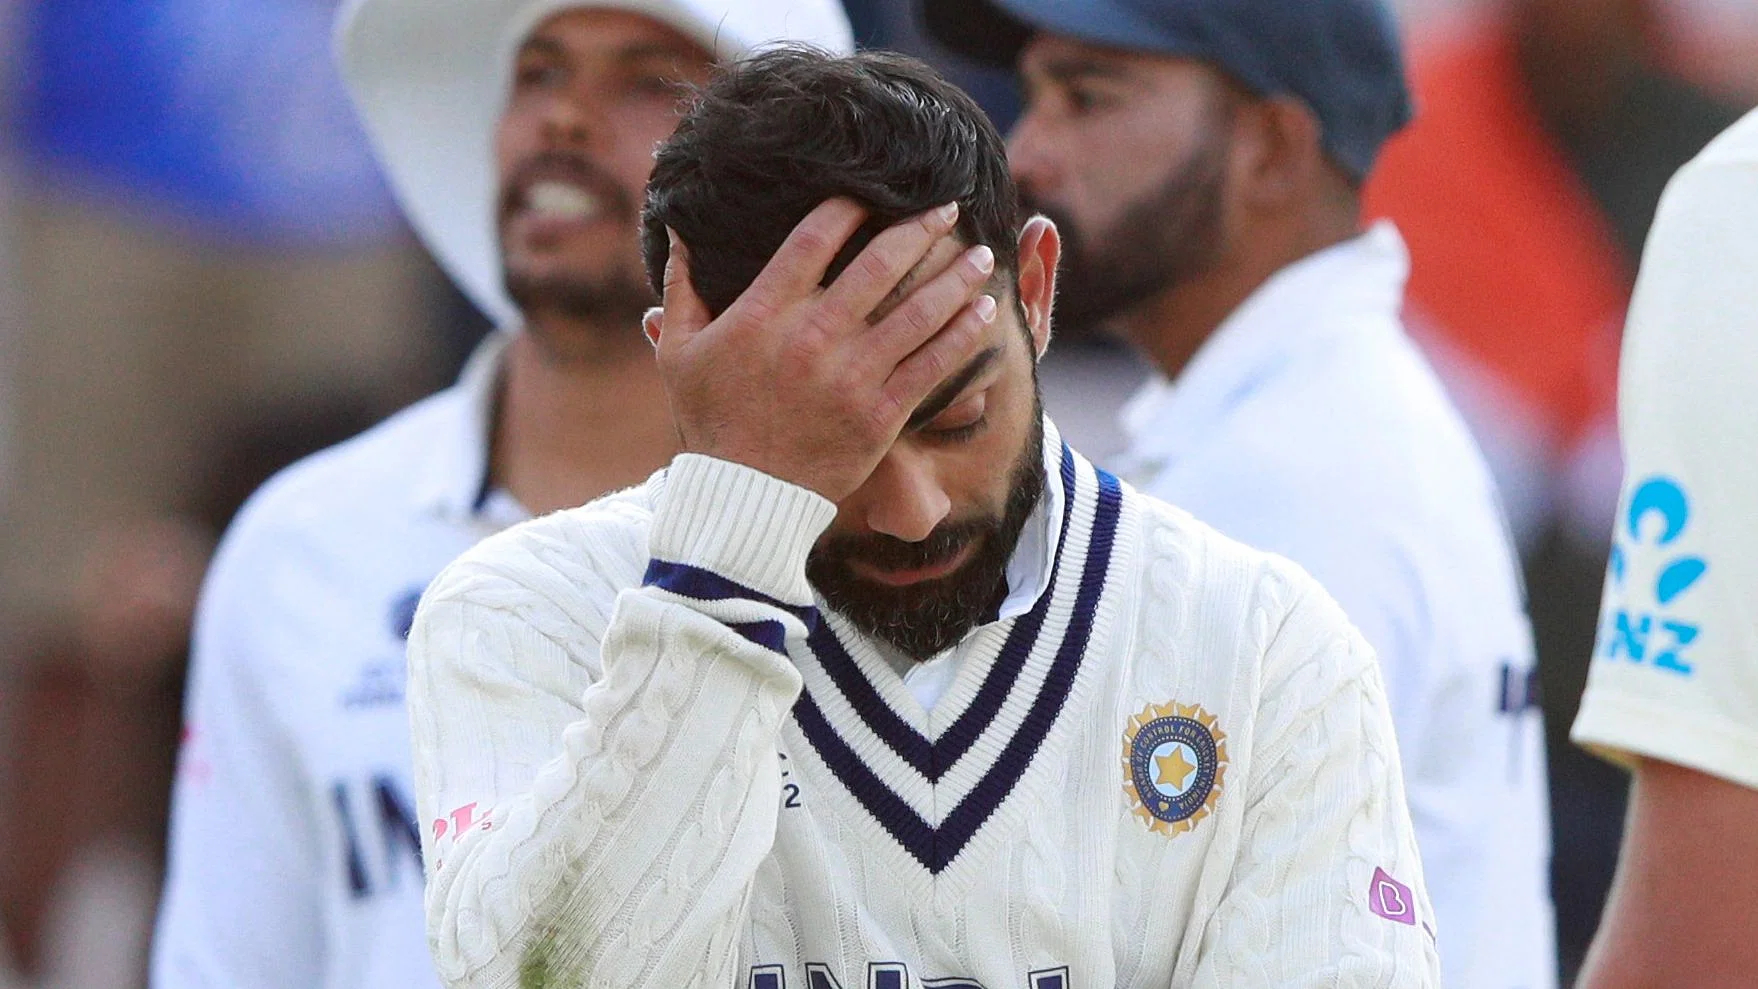 IANS reports suggested that BCCI was unhappy with Kohli's captaincy post WTC debacle | AFP